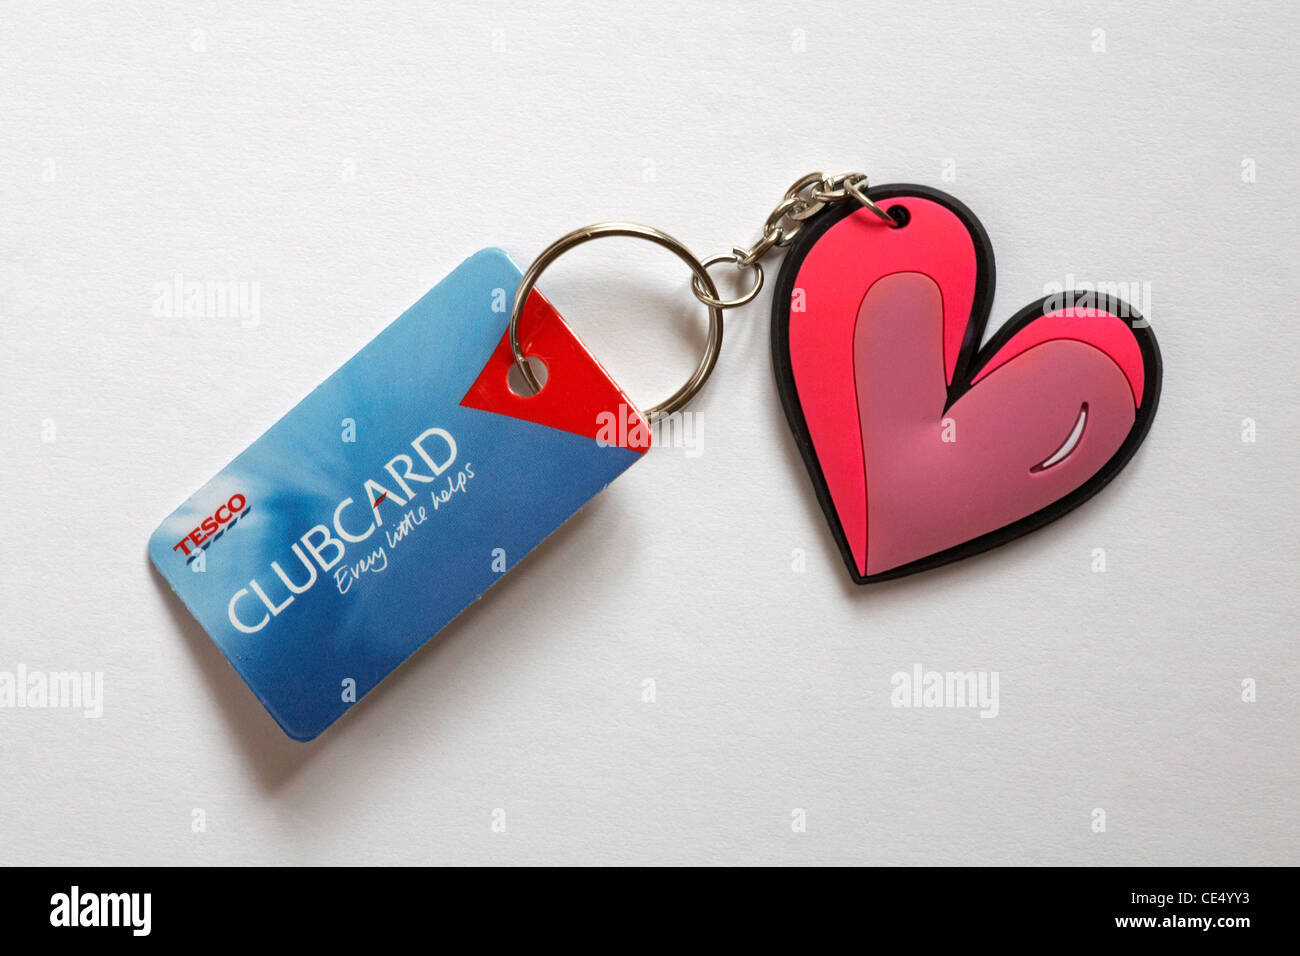 Tesco clubcard attached to heart shaped keyring isolated on white background Stock Photo